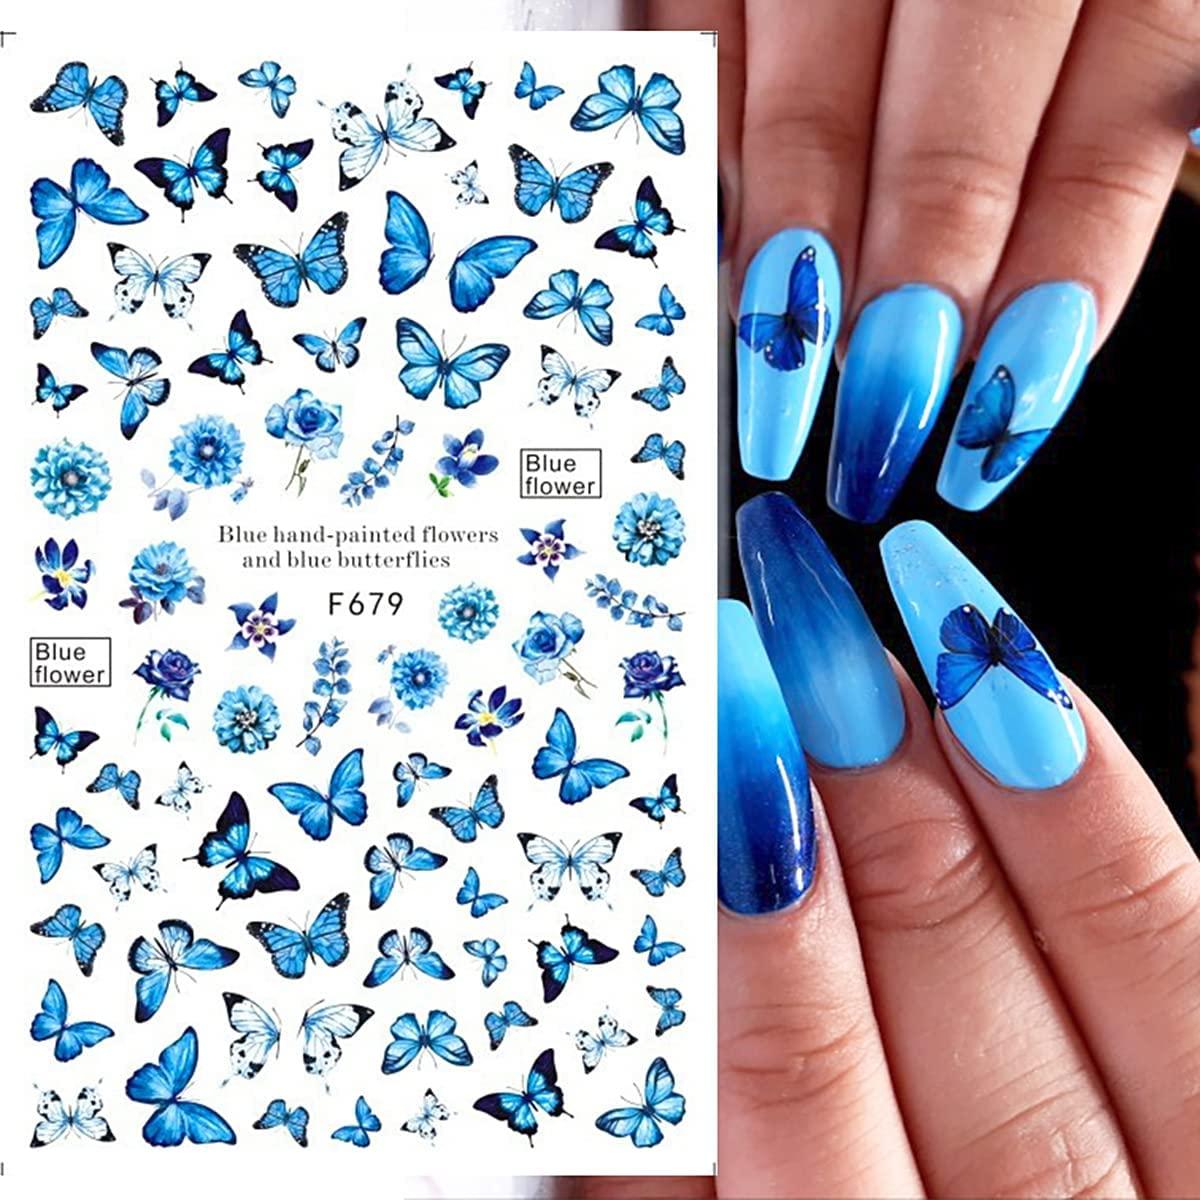 Butterfly Nail Stickers 3D Self Adhesive Waterproof Art Applique Art Series Manicure  Decal Nails Foils Decoration Supplies Parts